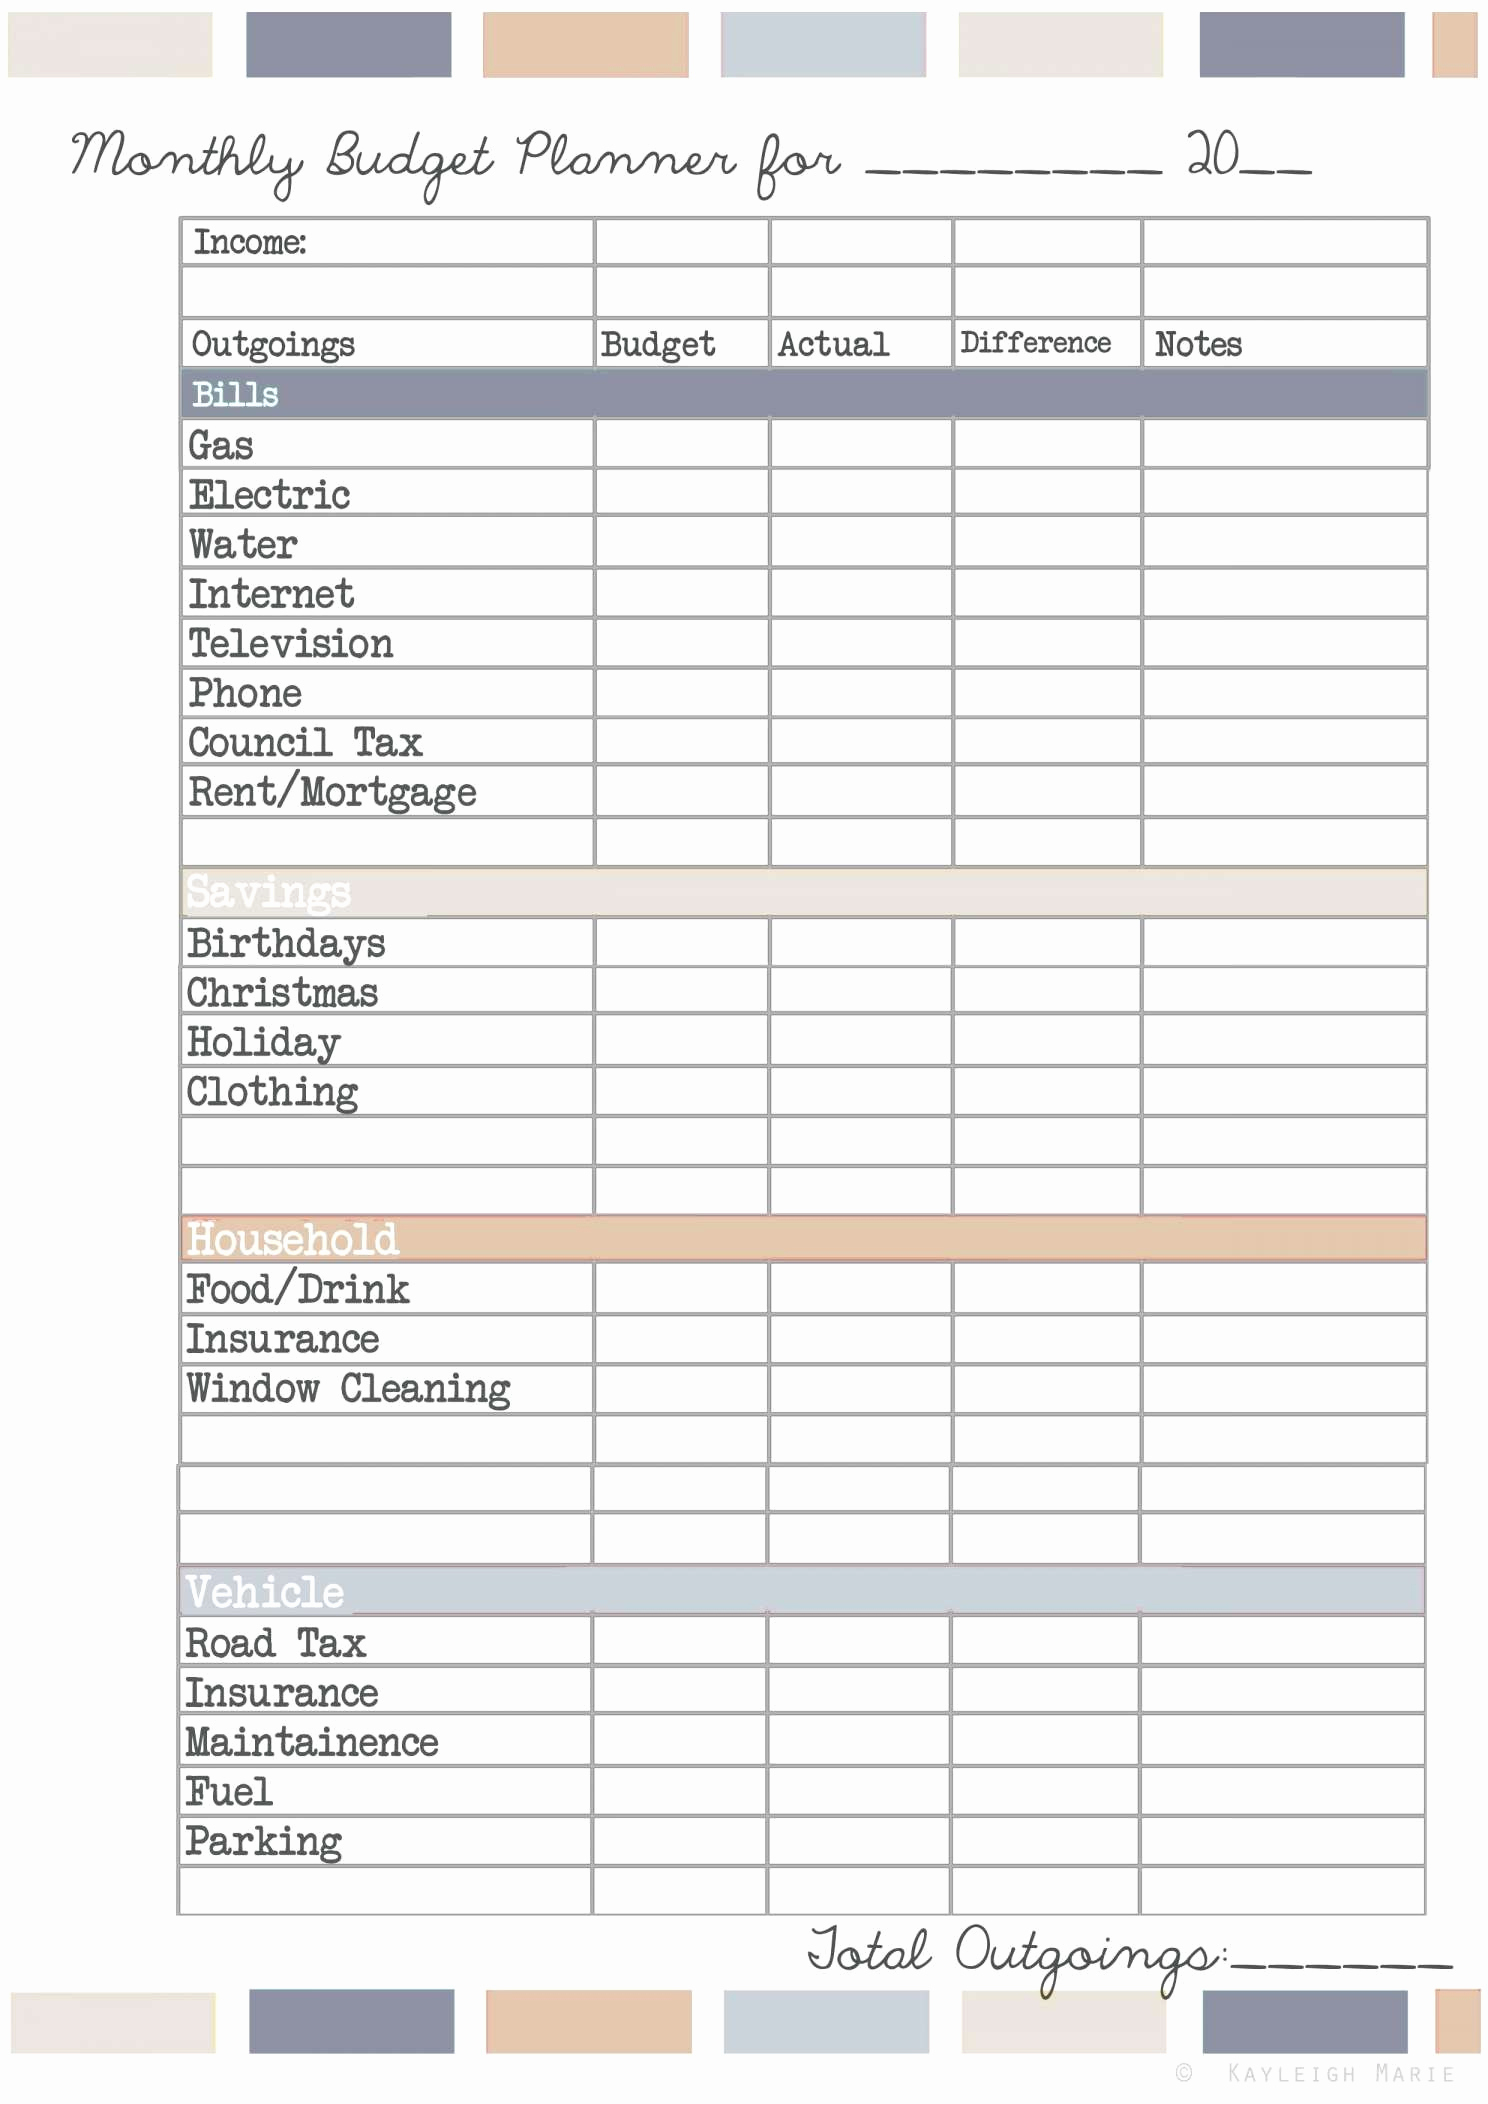 Spreadsheet Software Comparison Within Property Comparison Spreadsheet As Spreadsheet Software Free